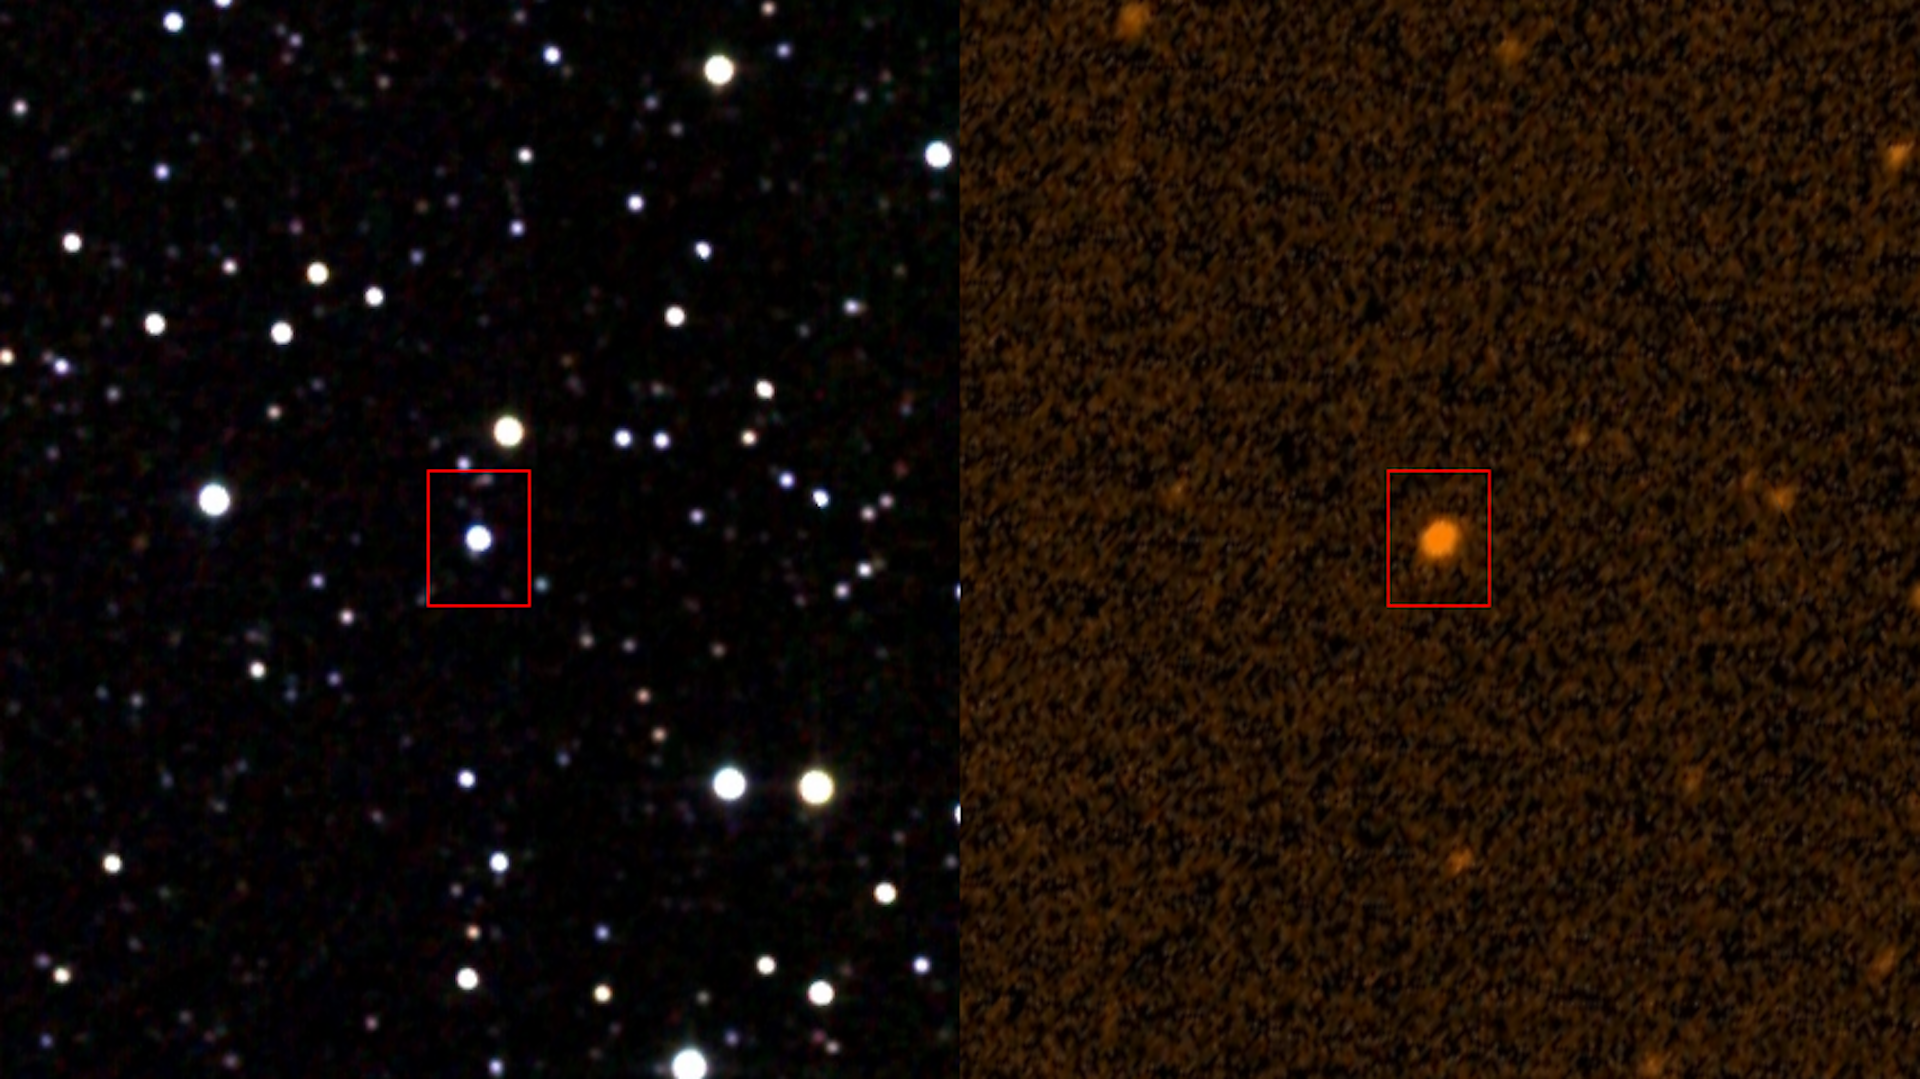 Image of Tabby's Star in infrared and ultraviolet.